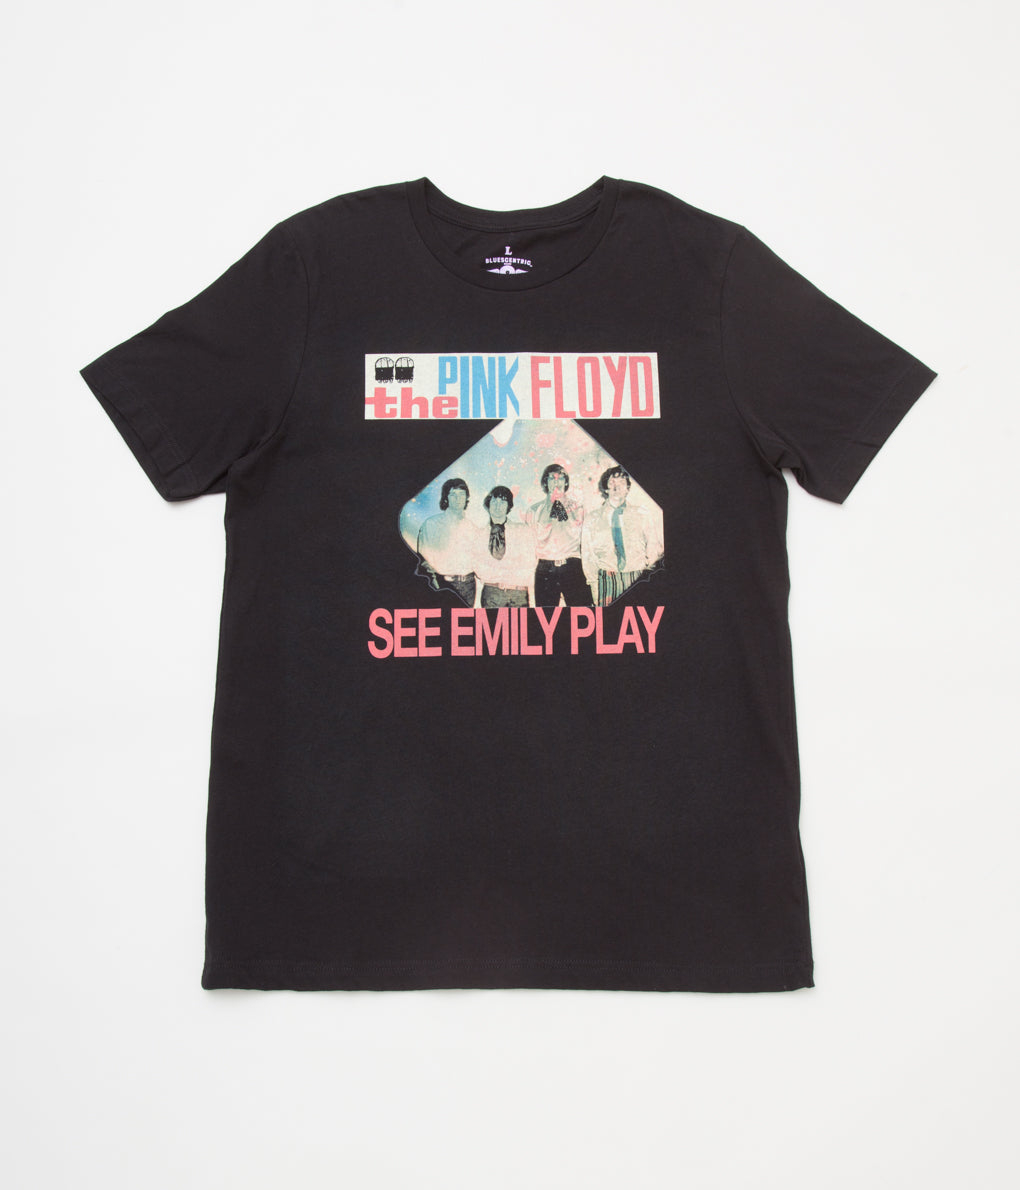 BLUESCENTRIC "PINK FLOYD SEE EMILY PLAY T-SHIRT" (BLACK)